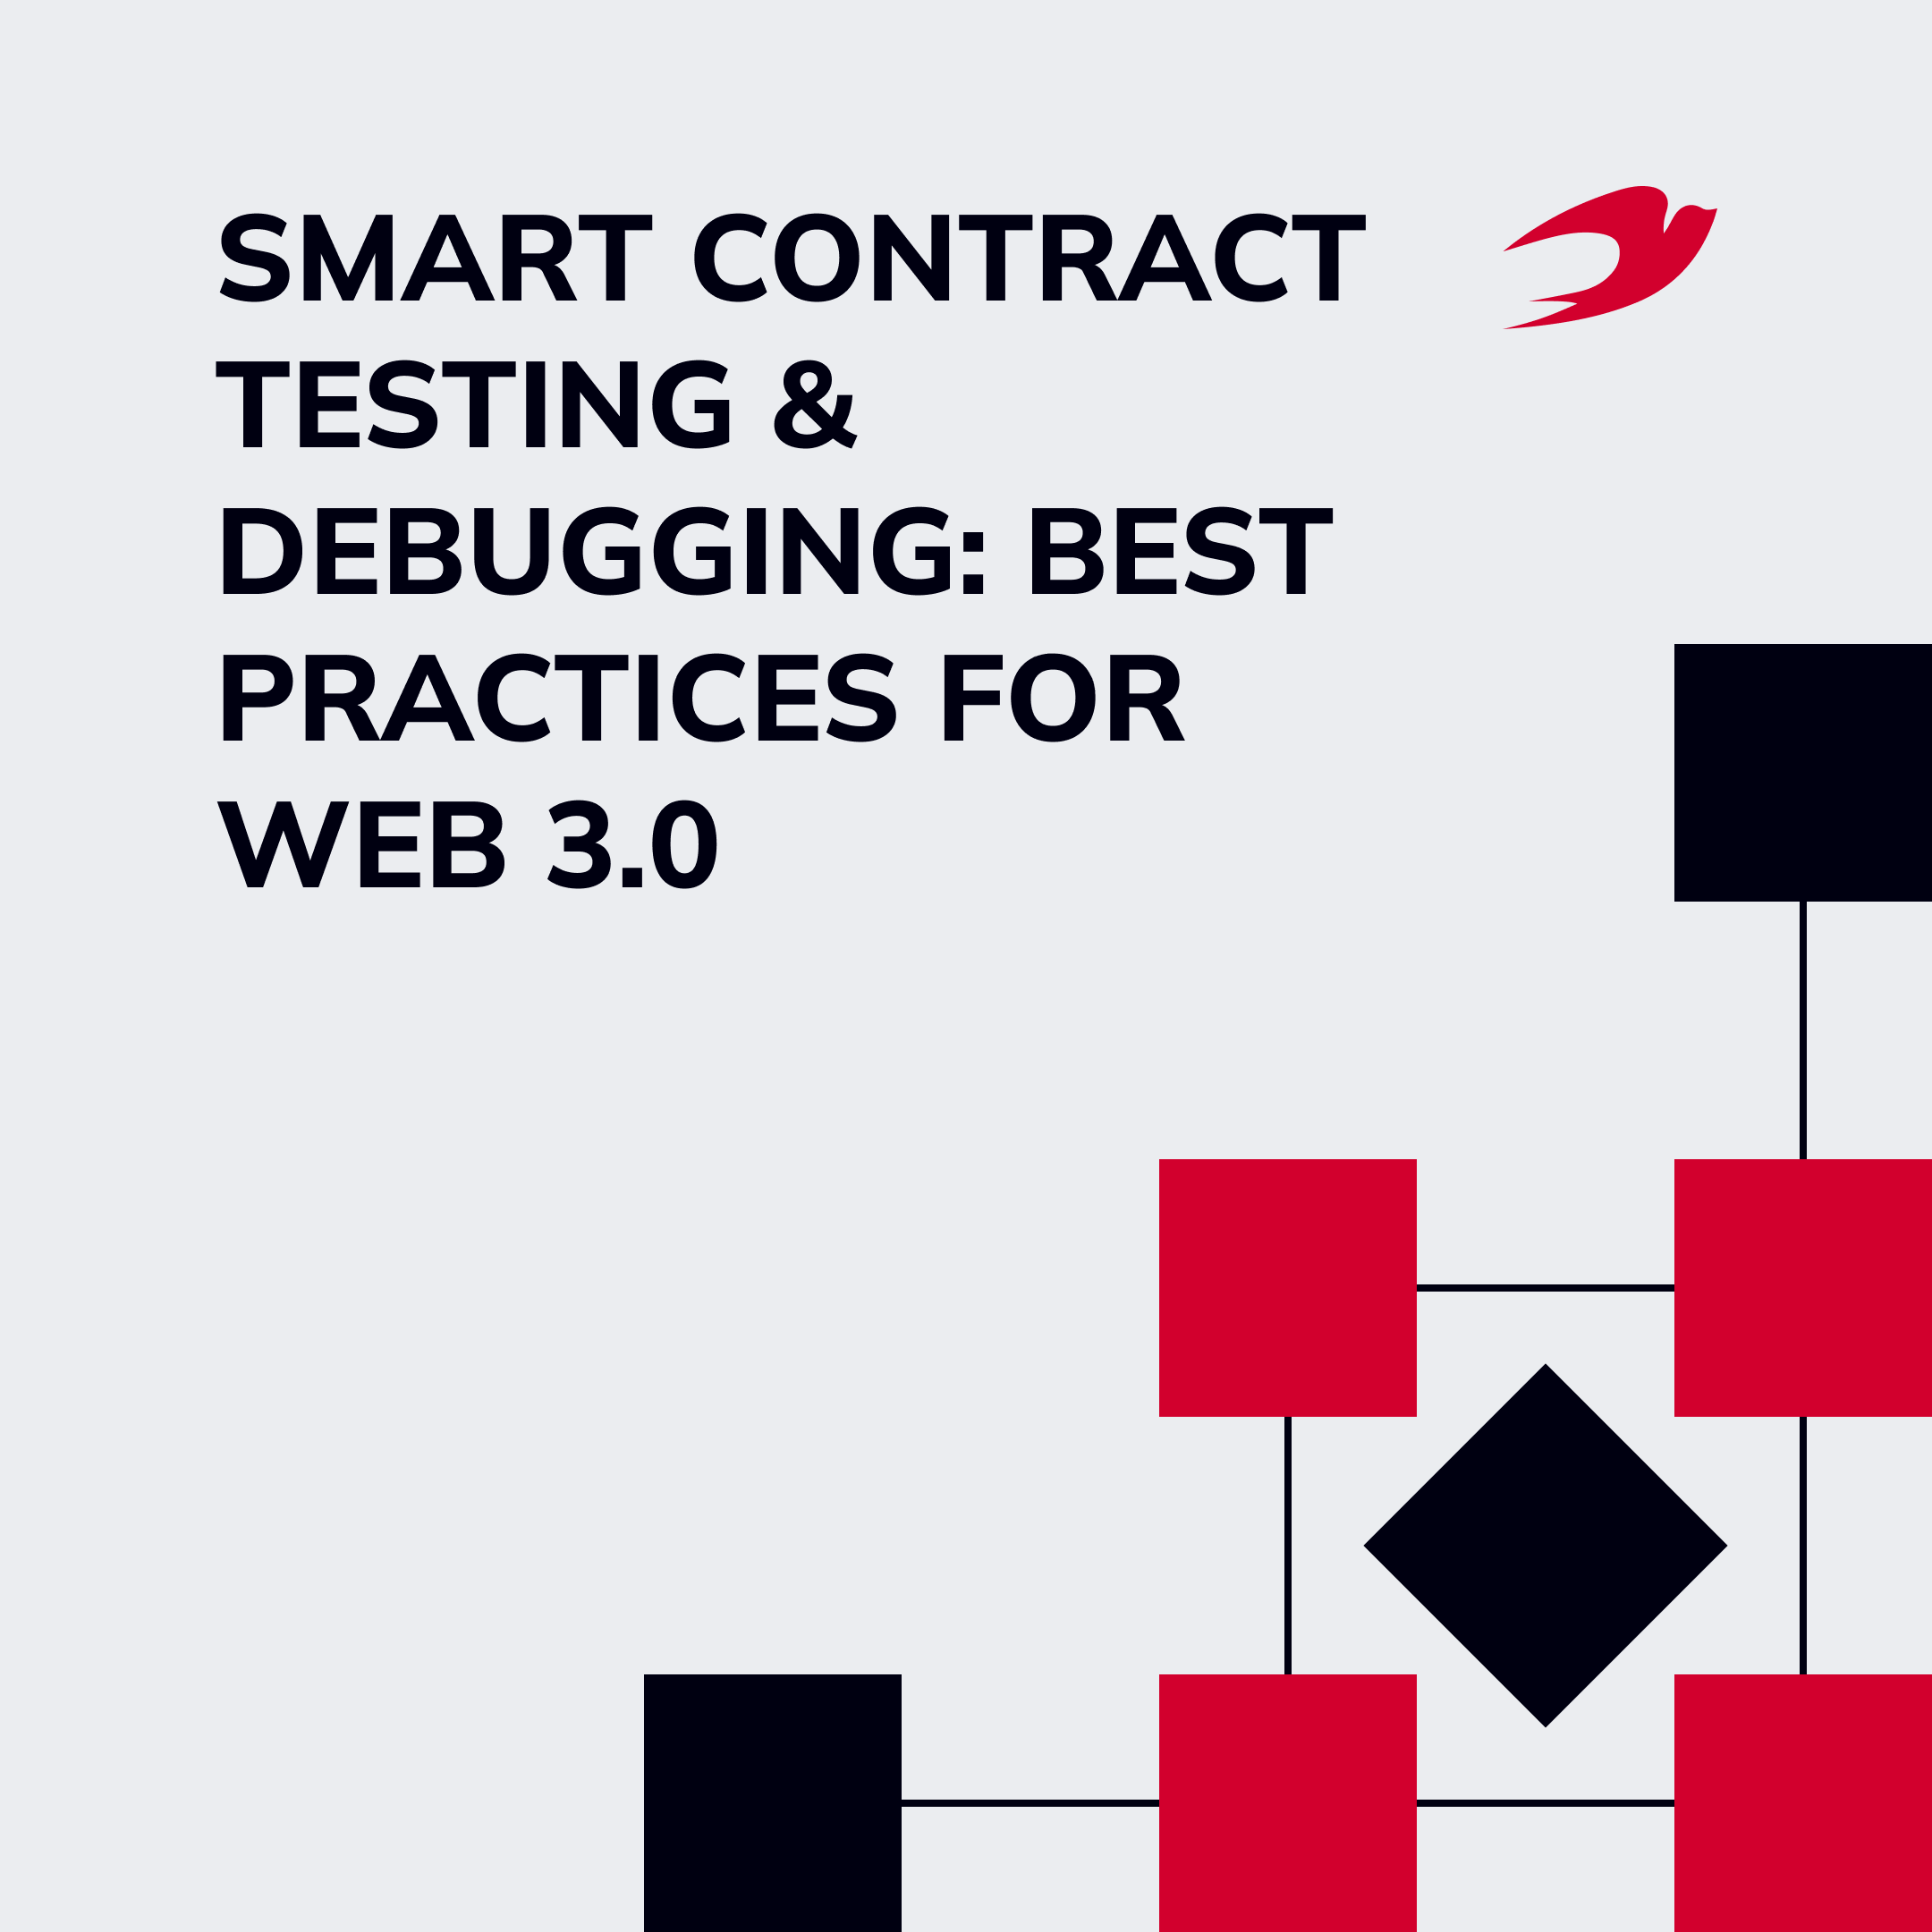 Smart Contract Testing & Debugging: Best Practices for Web 3.0